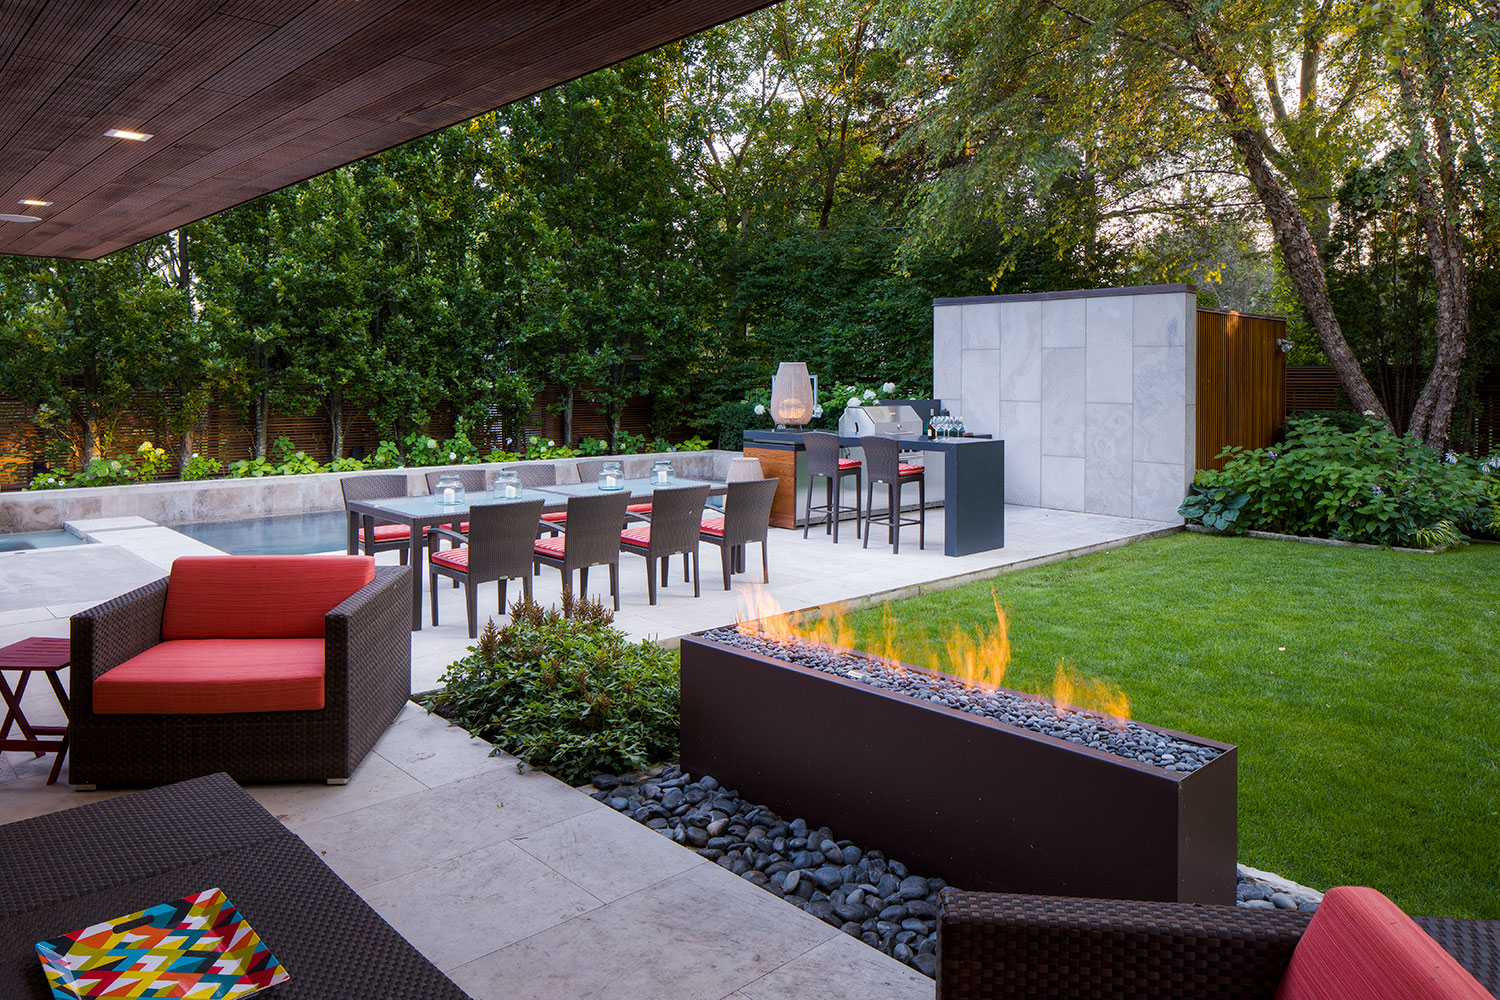 Feature Project – Luxury Outdoor Living